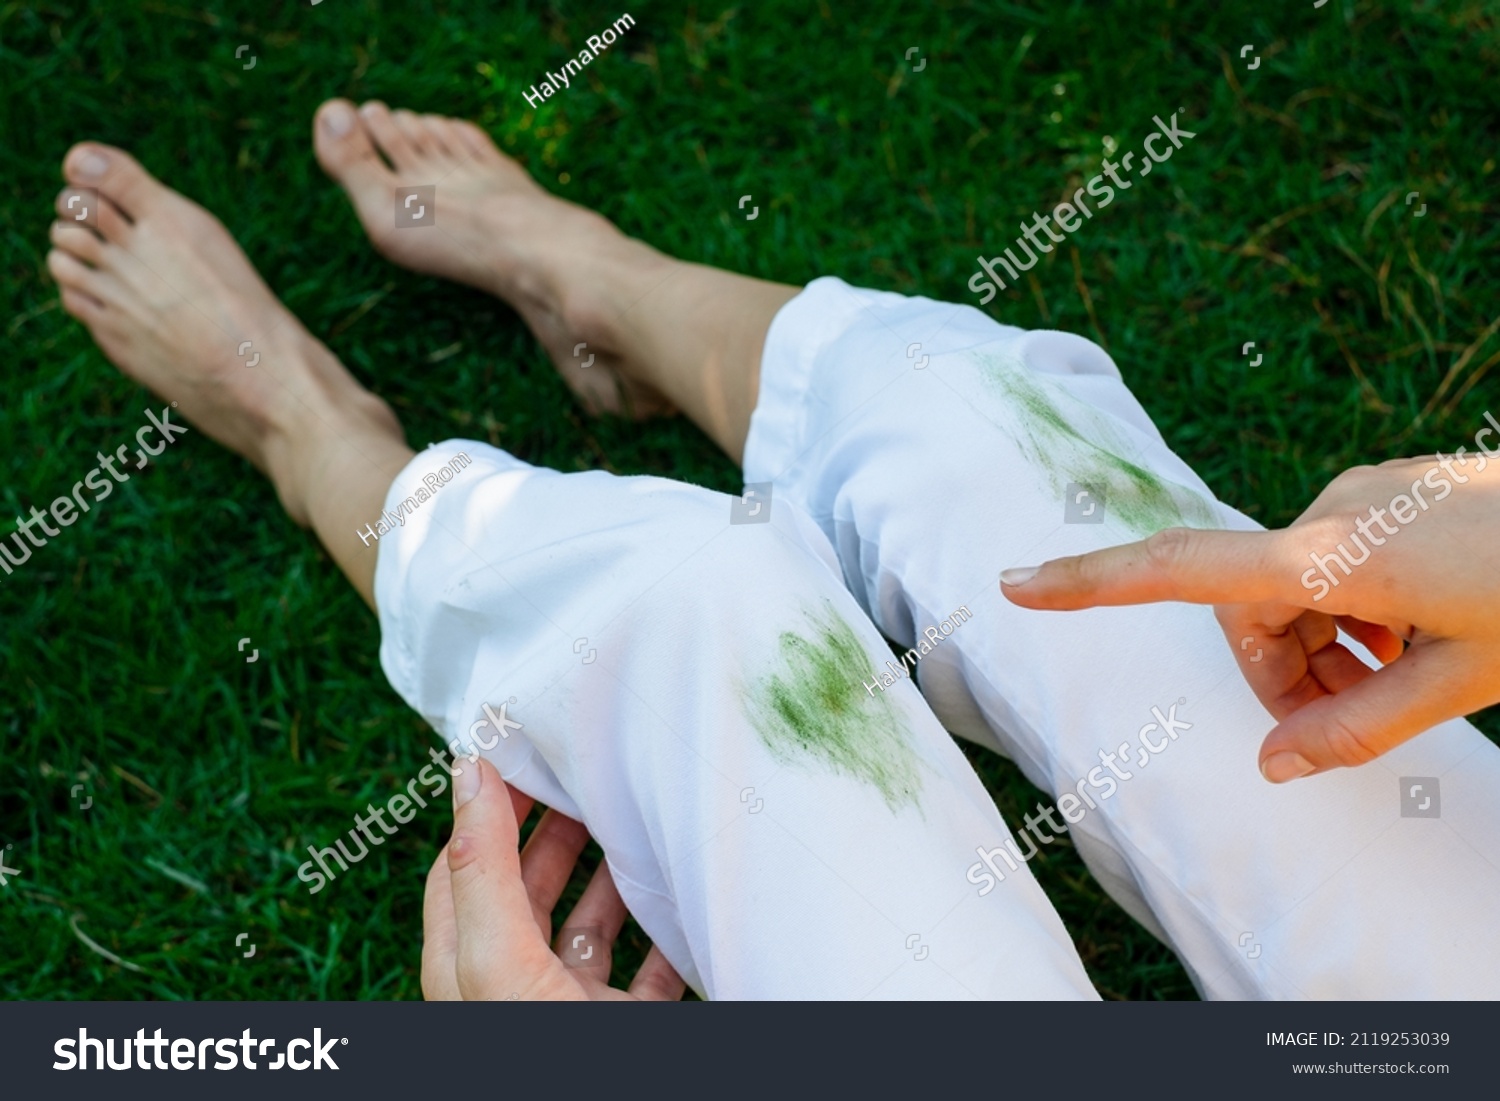 Hand showing dirty stain of grass on white pants from unexpected accident. top view. daily life stain concept. outodoors #2119253039